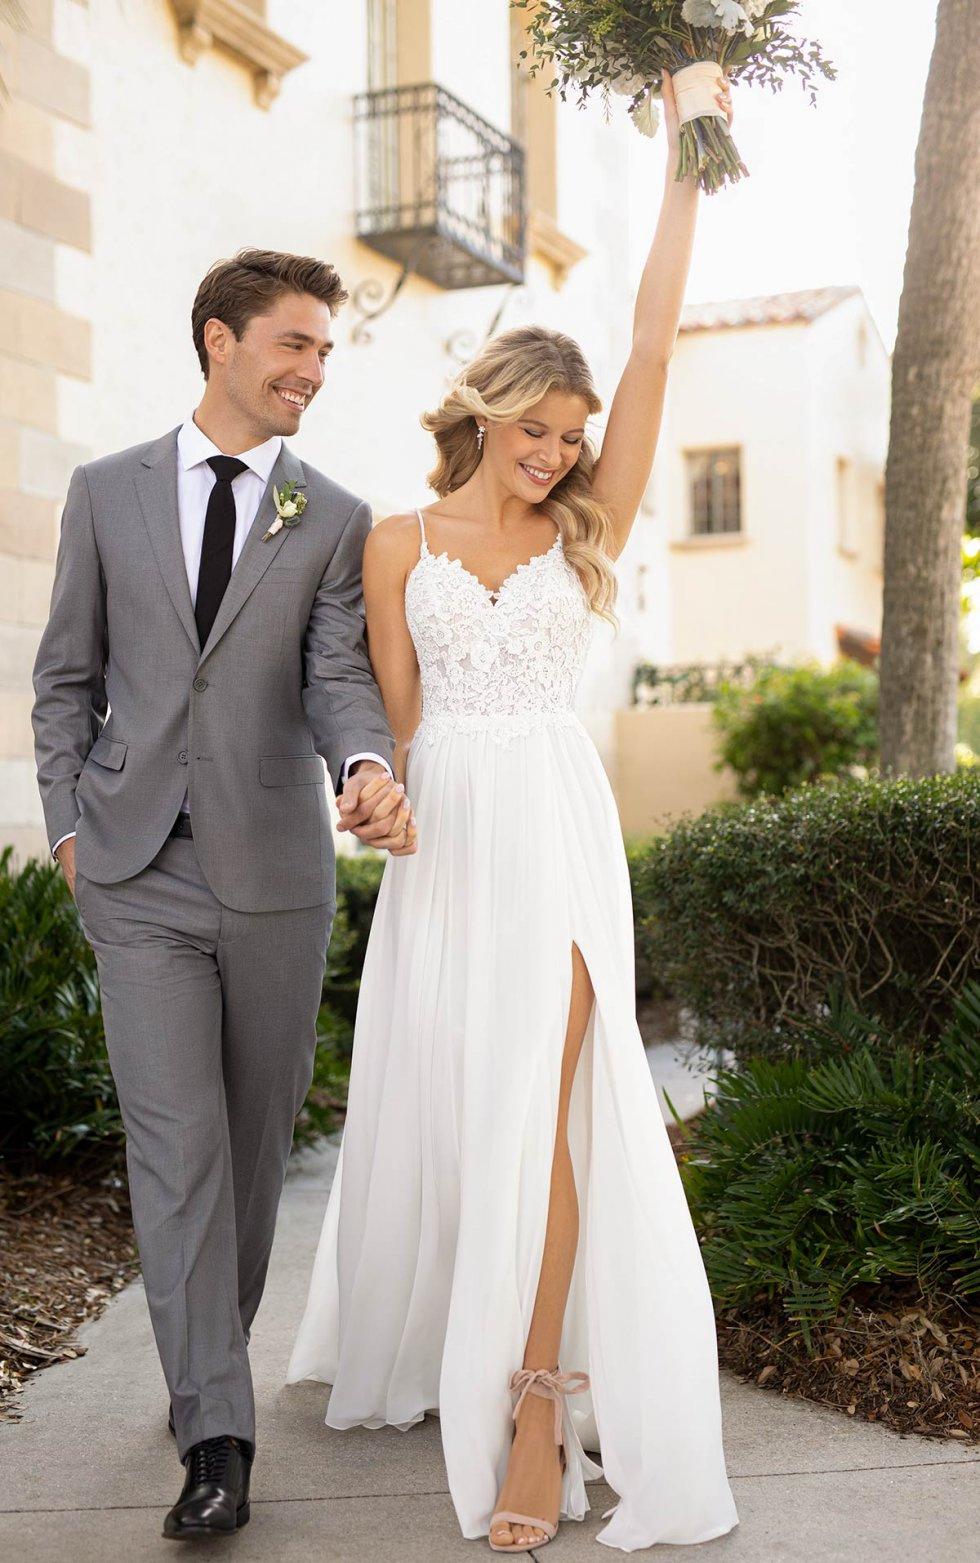 Find Your Ideal Wedding Dress Based on Your Zodiac Sign